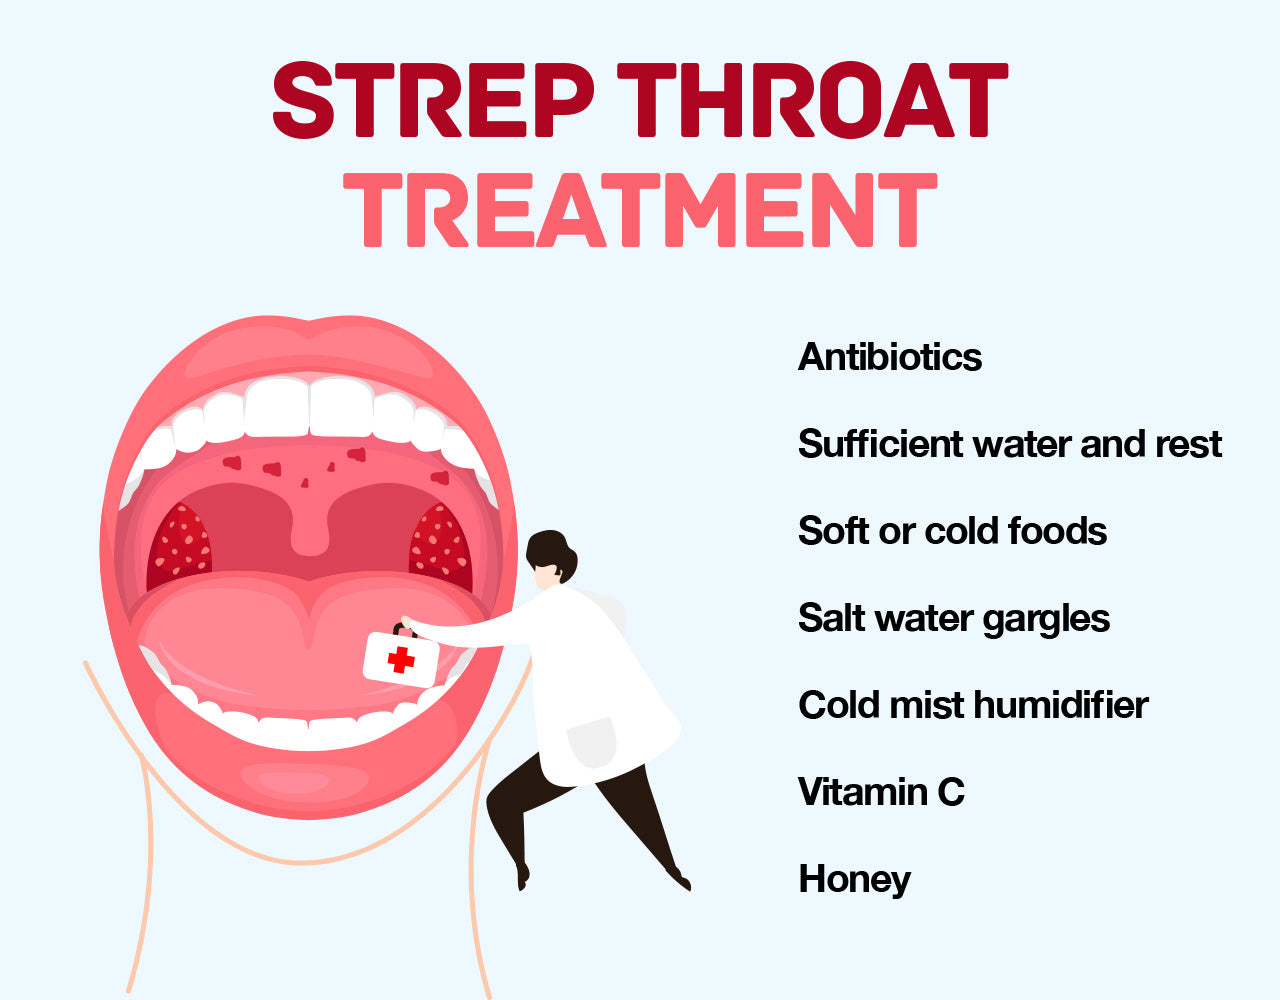 Strep throat is an infection of the throat and tonsils